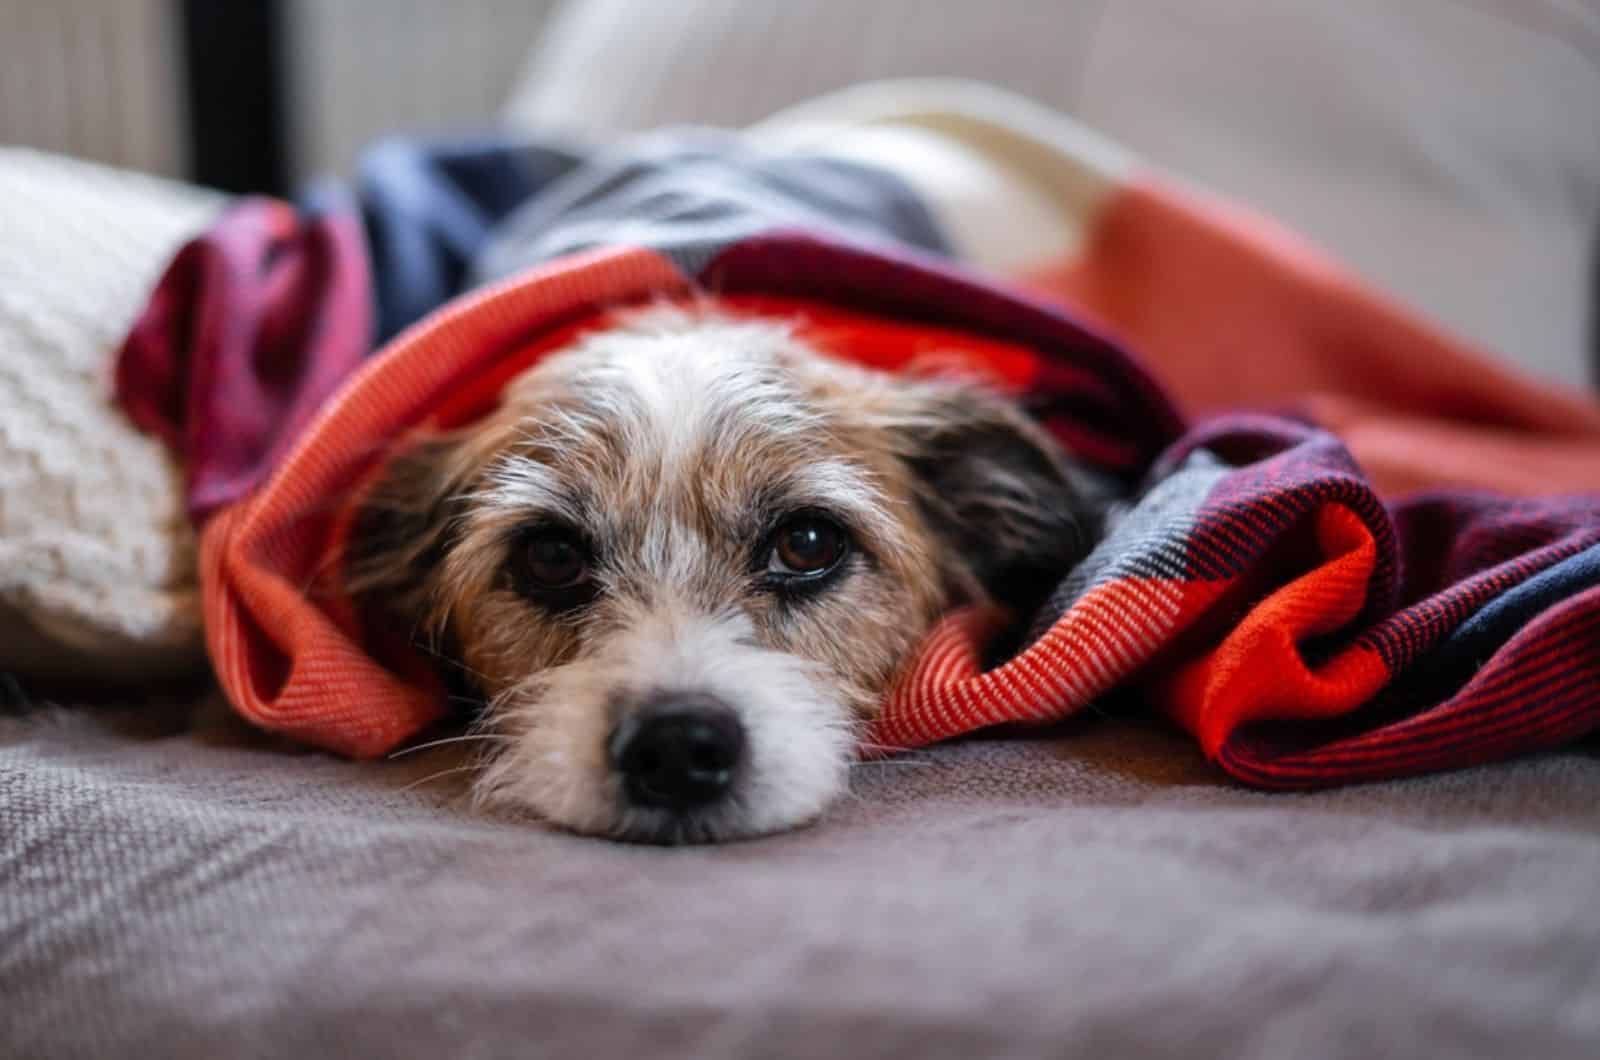 Jack Russel dog lies wrapped in a brightly colored blanket